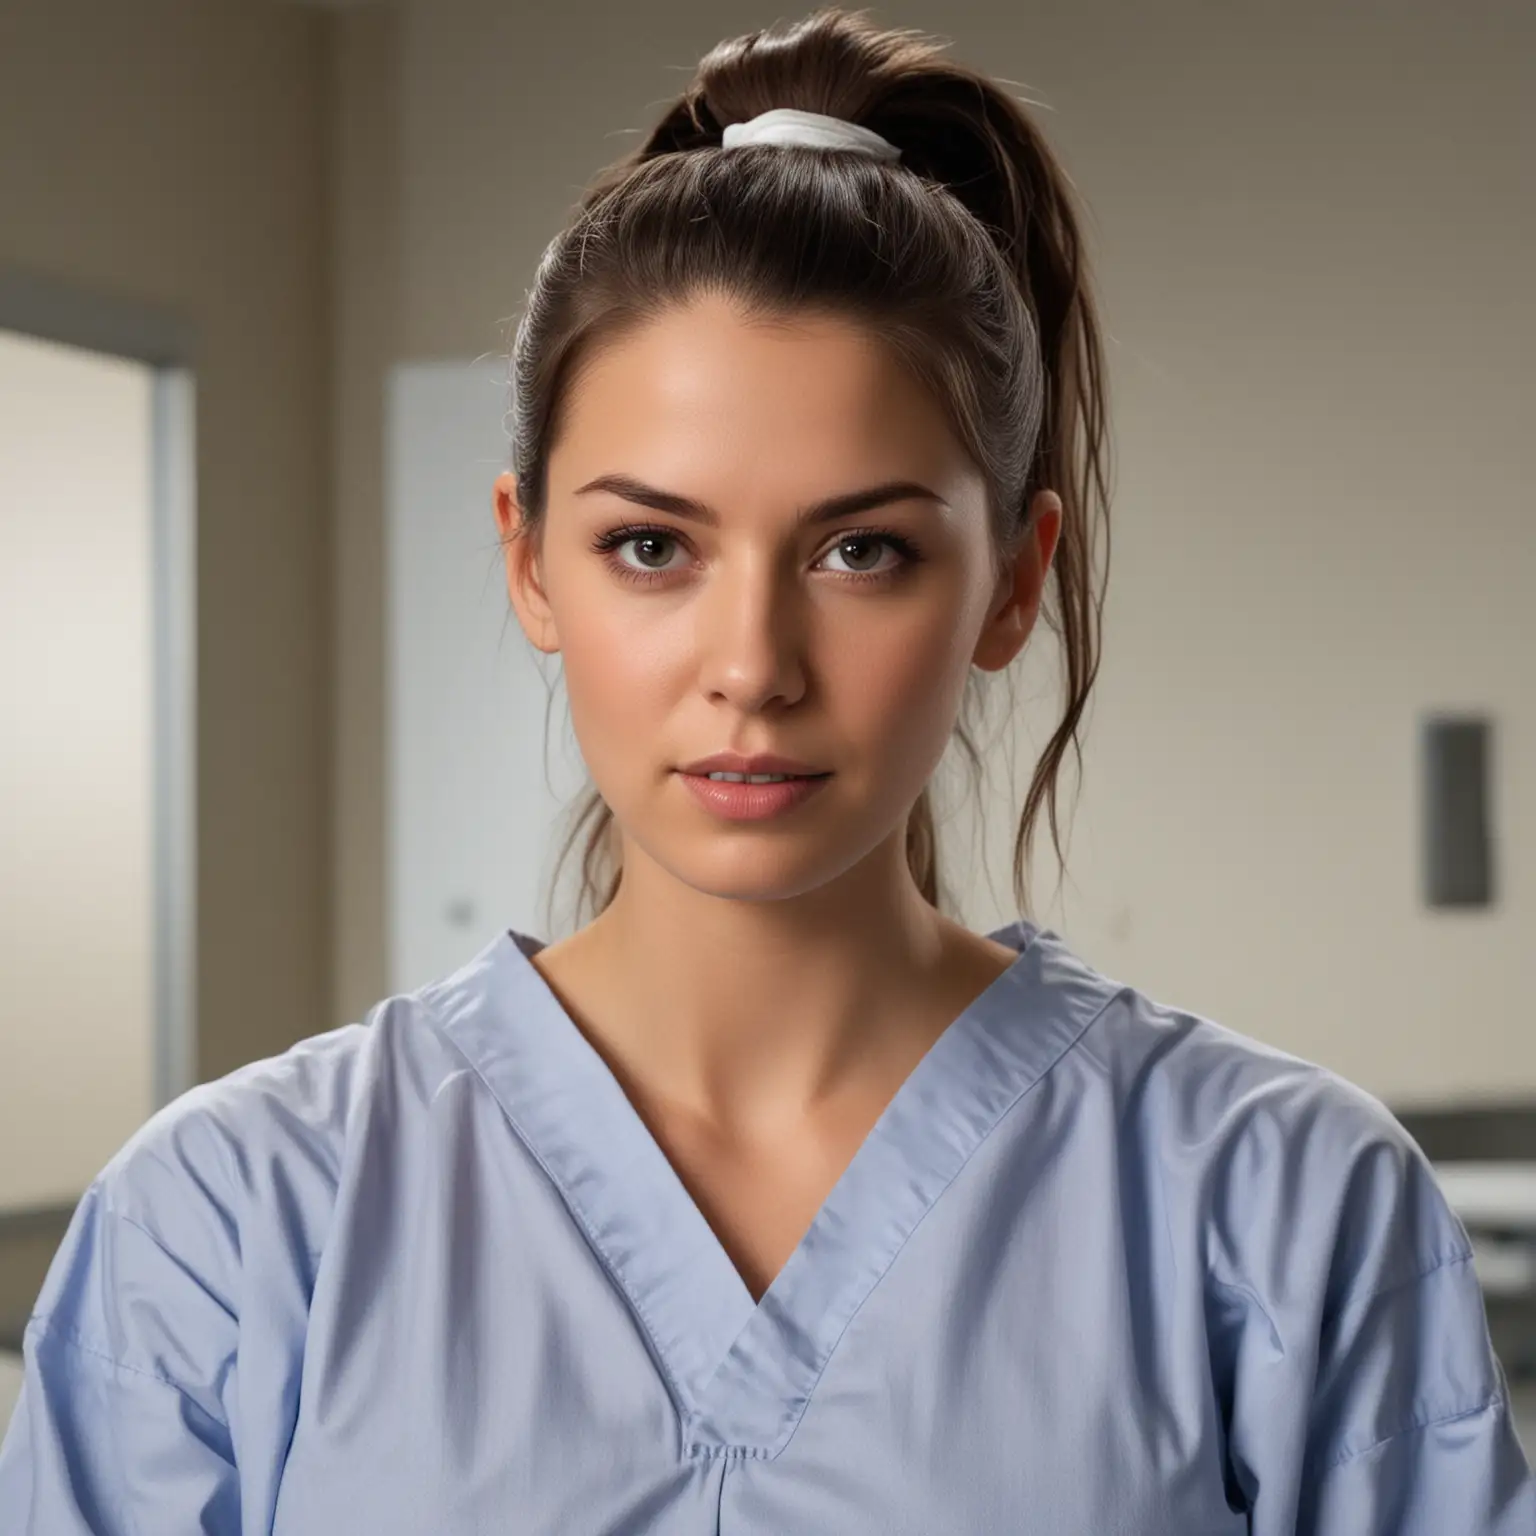 Portrait of a Mysterious Brunette in Hospital Gown